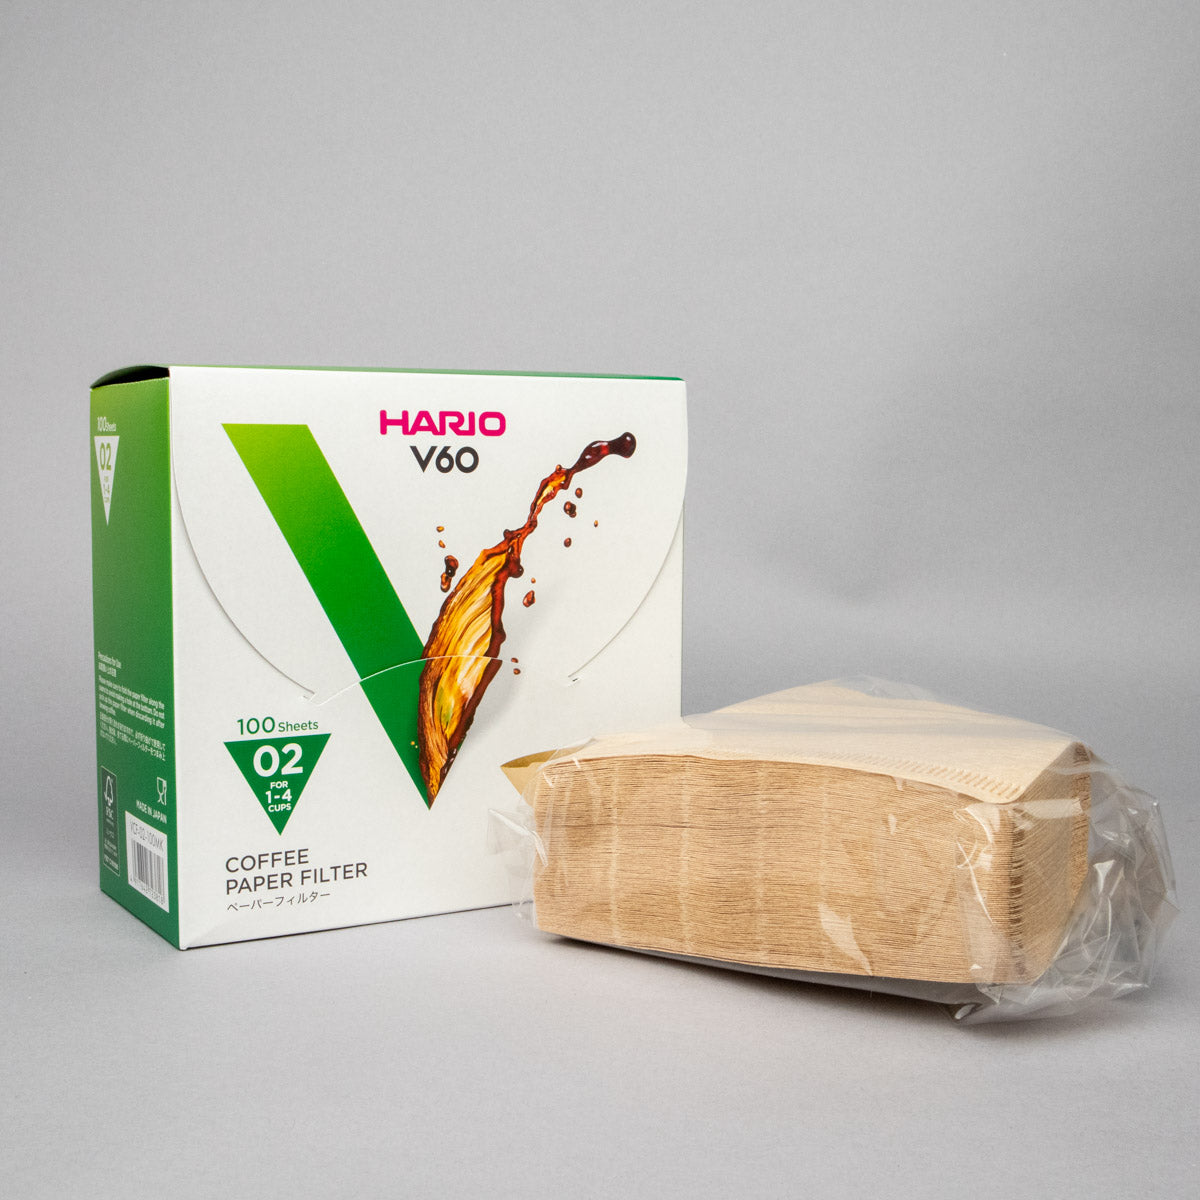 Hario Ceramic Starter Gift Set: Hario Mini Mill Plus V60 Ceramic Starter Kit Size 02 (Red) and a 250g Bag of Specialty Coffee Beans